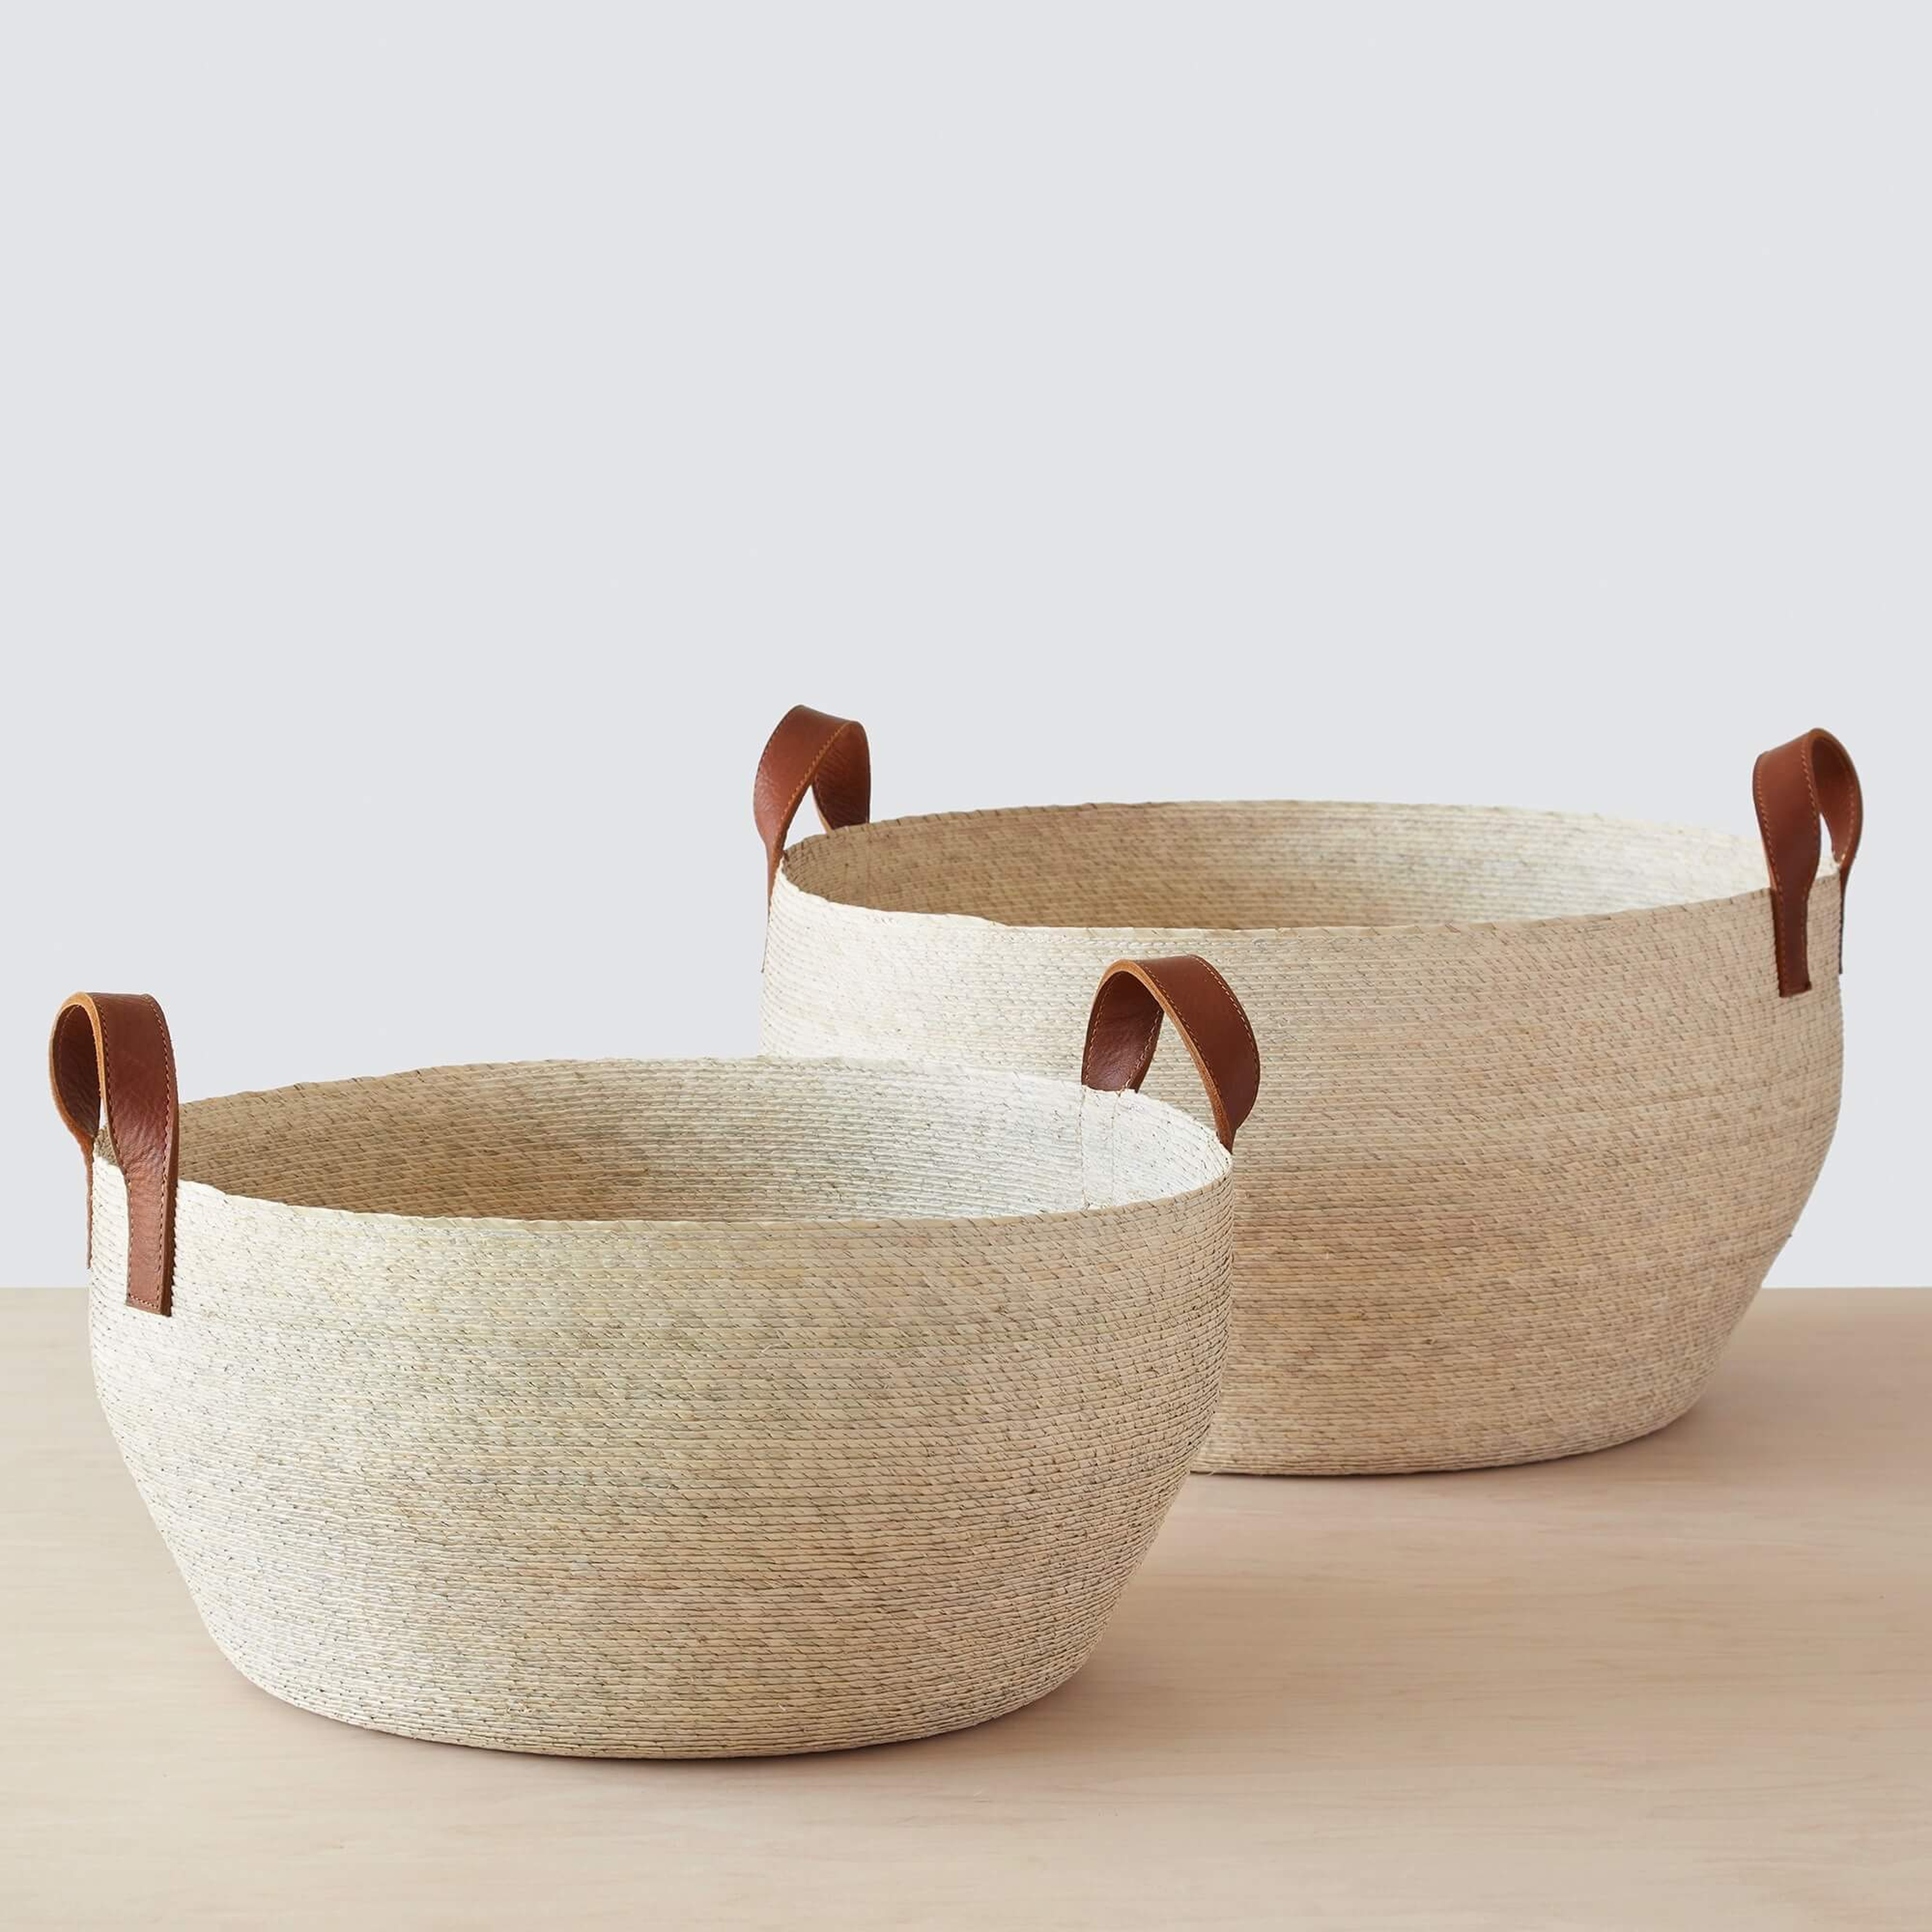 Mercado Floor Baskets - Set of Two - 1 ea. By The Citizenry - The Citizenry